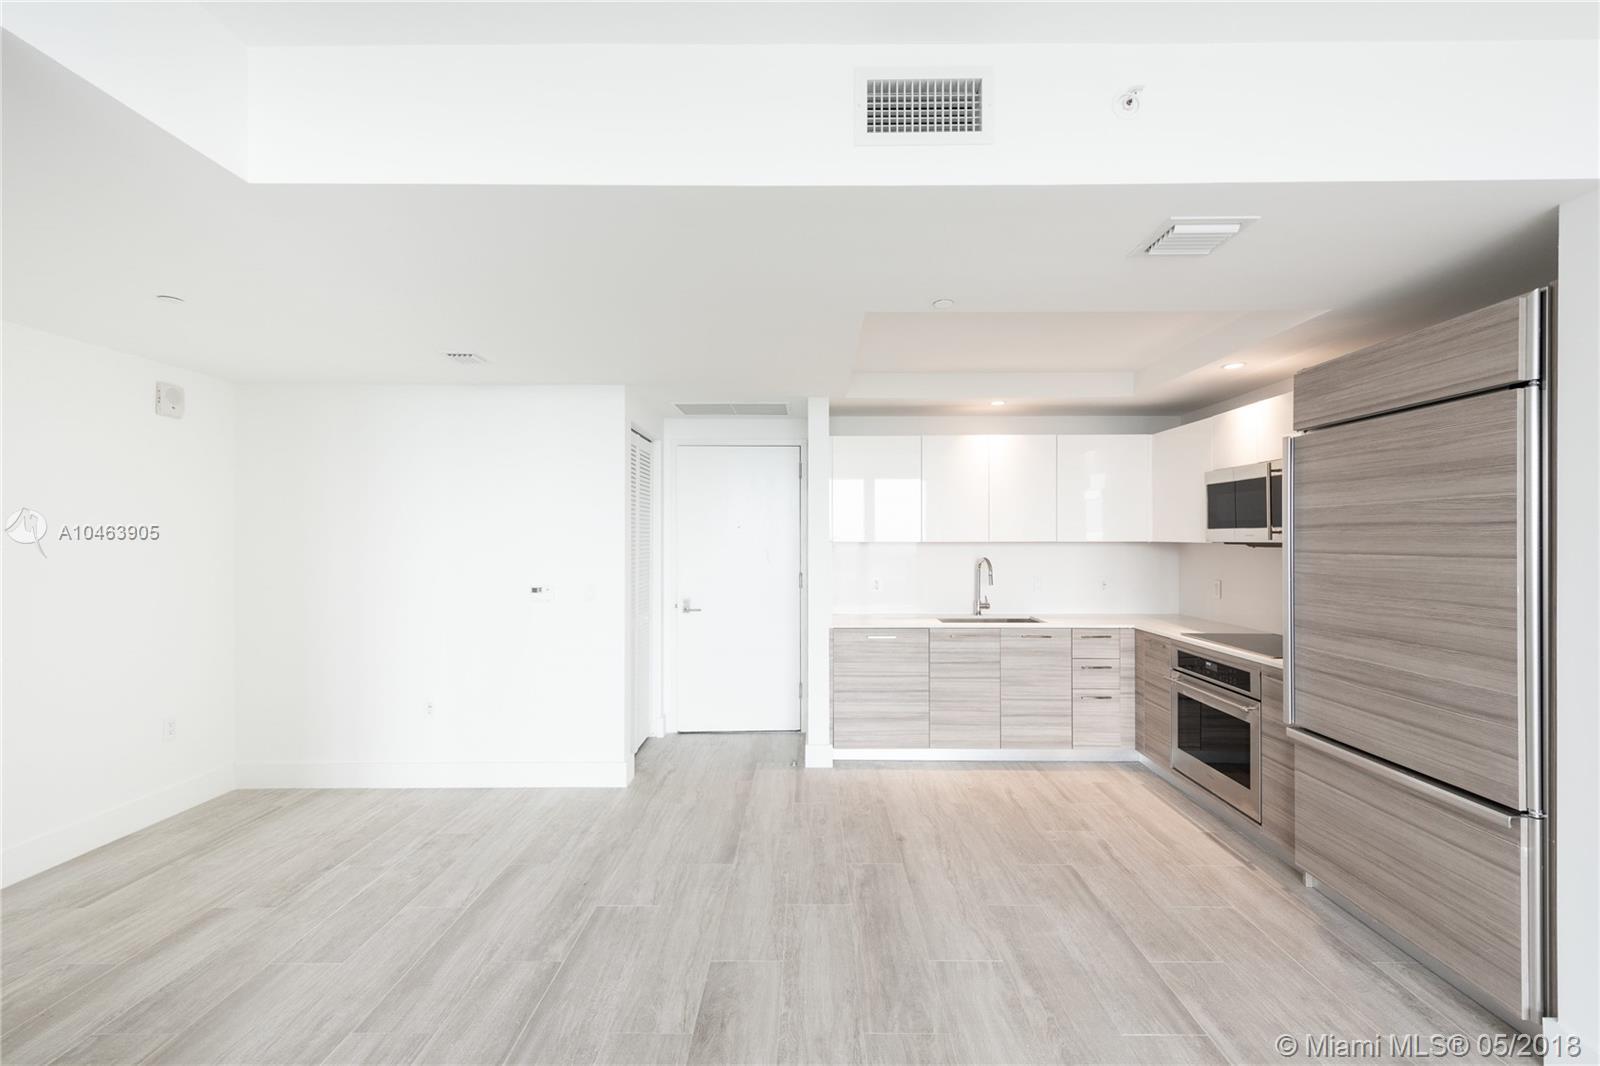 Very desirable floor plan, 1 bedroom + den, facing west. Many upgrades to enjoy, including high end 